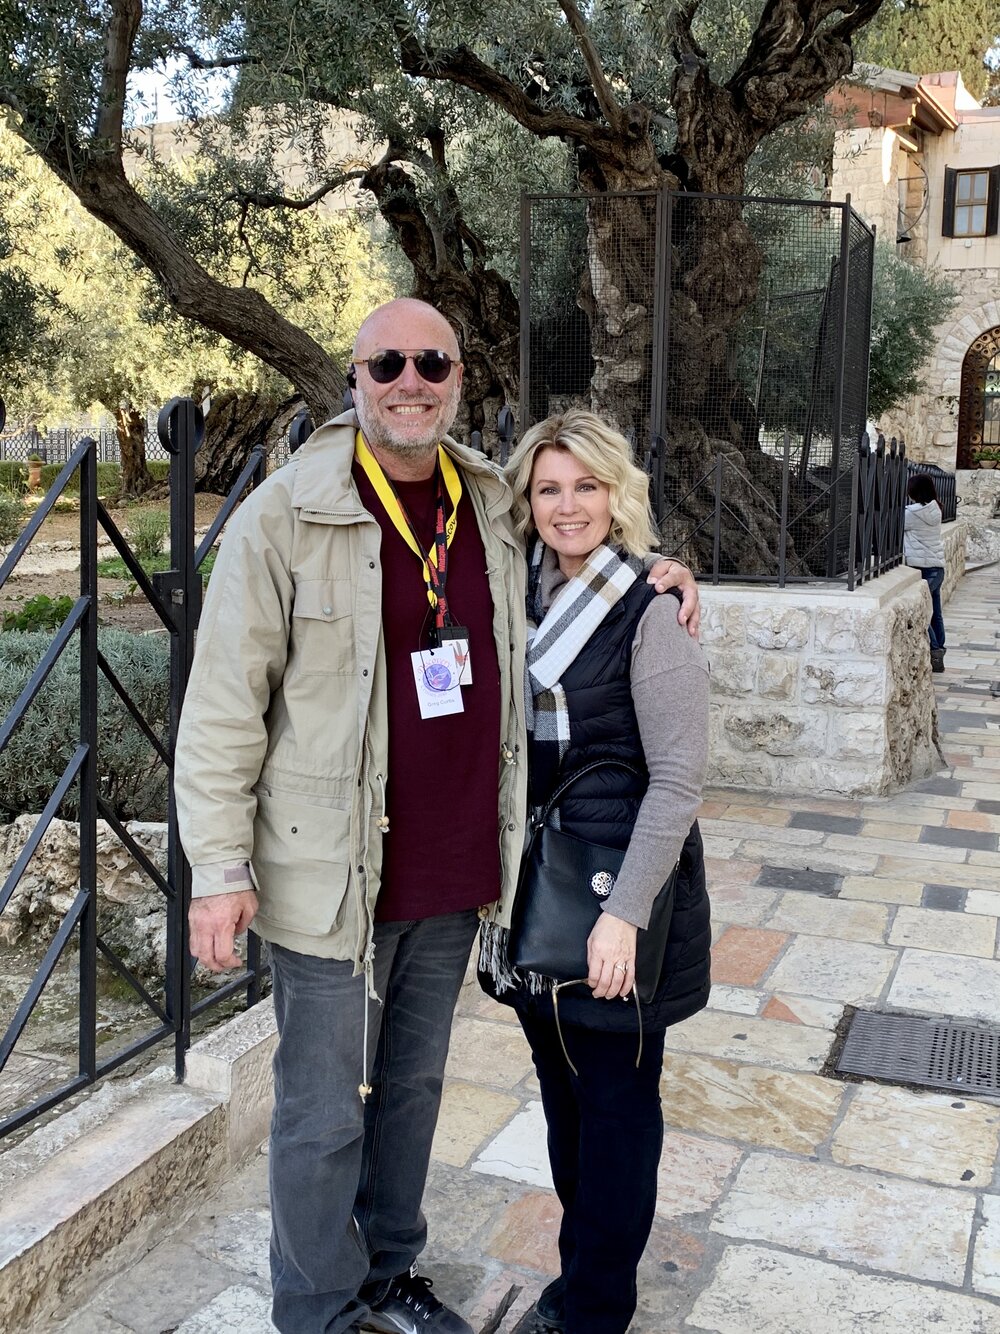 Here is a photo of Michelle and I once we made it down the long road to the Church of All Nations in the Garden of Gethsemane. We are standing in front of what is the oldest Olive Tree in the garden, around a thousand years old.